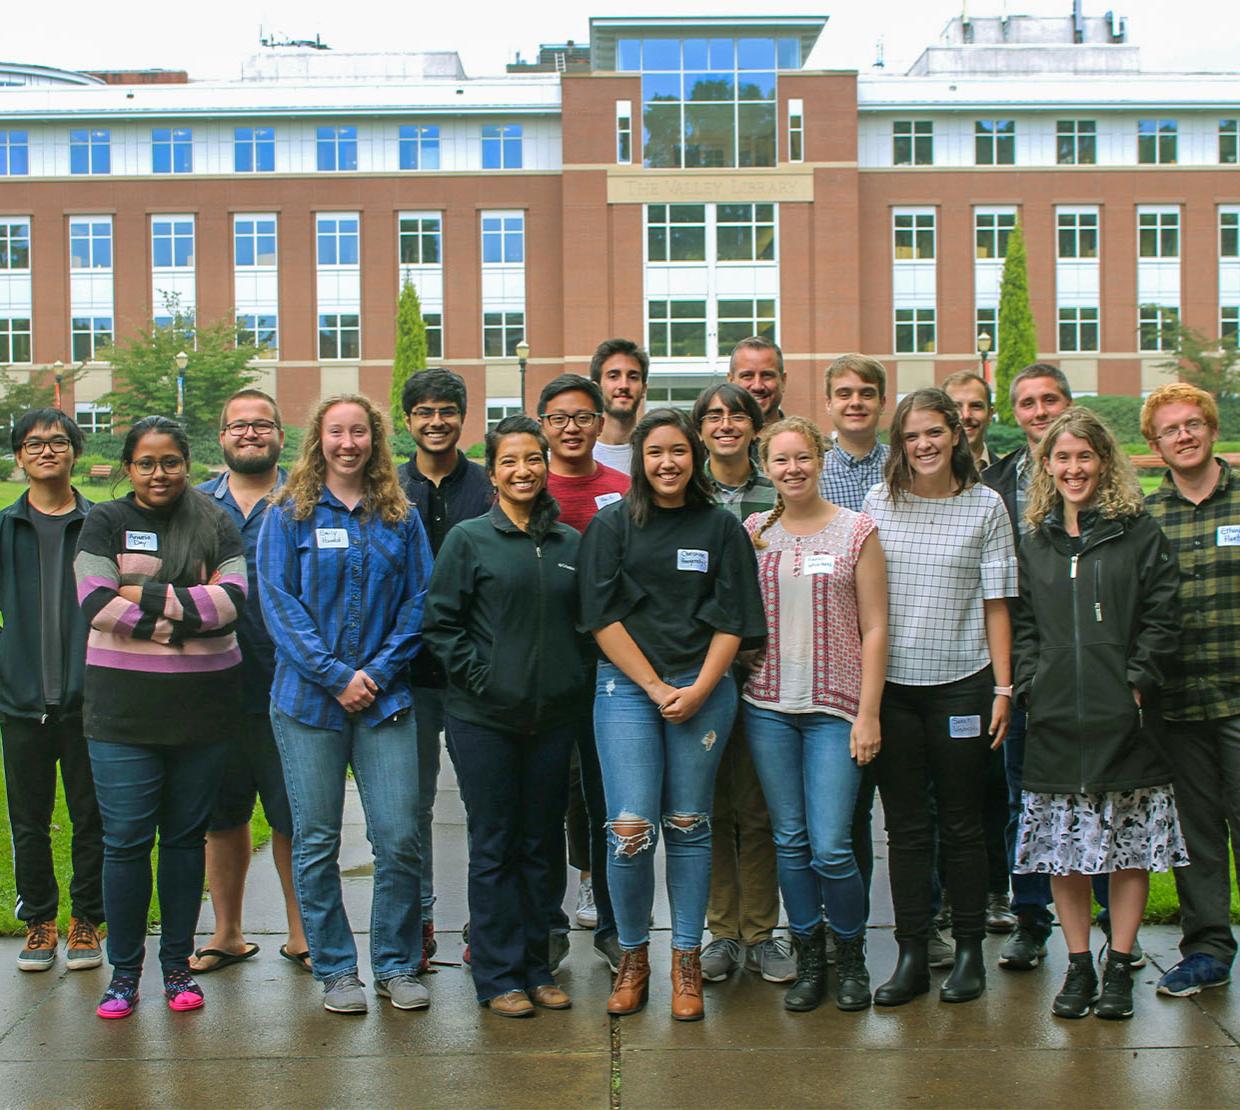 2019 new graduate students in the library quad